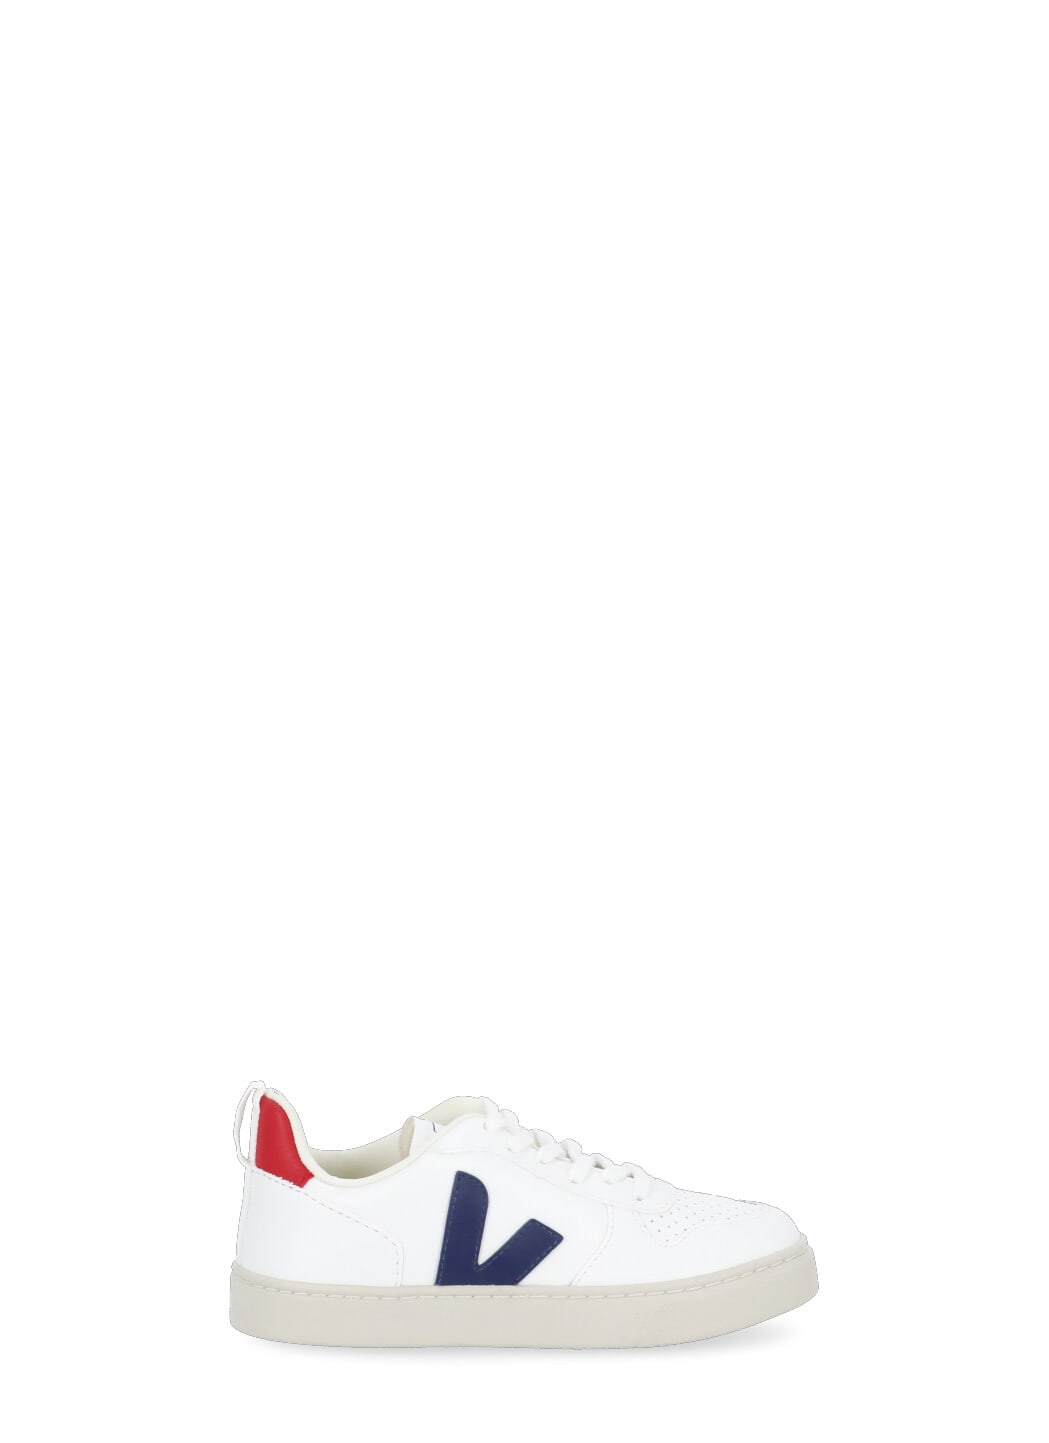 Veja Eco-leather Sneakers